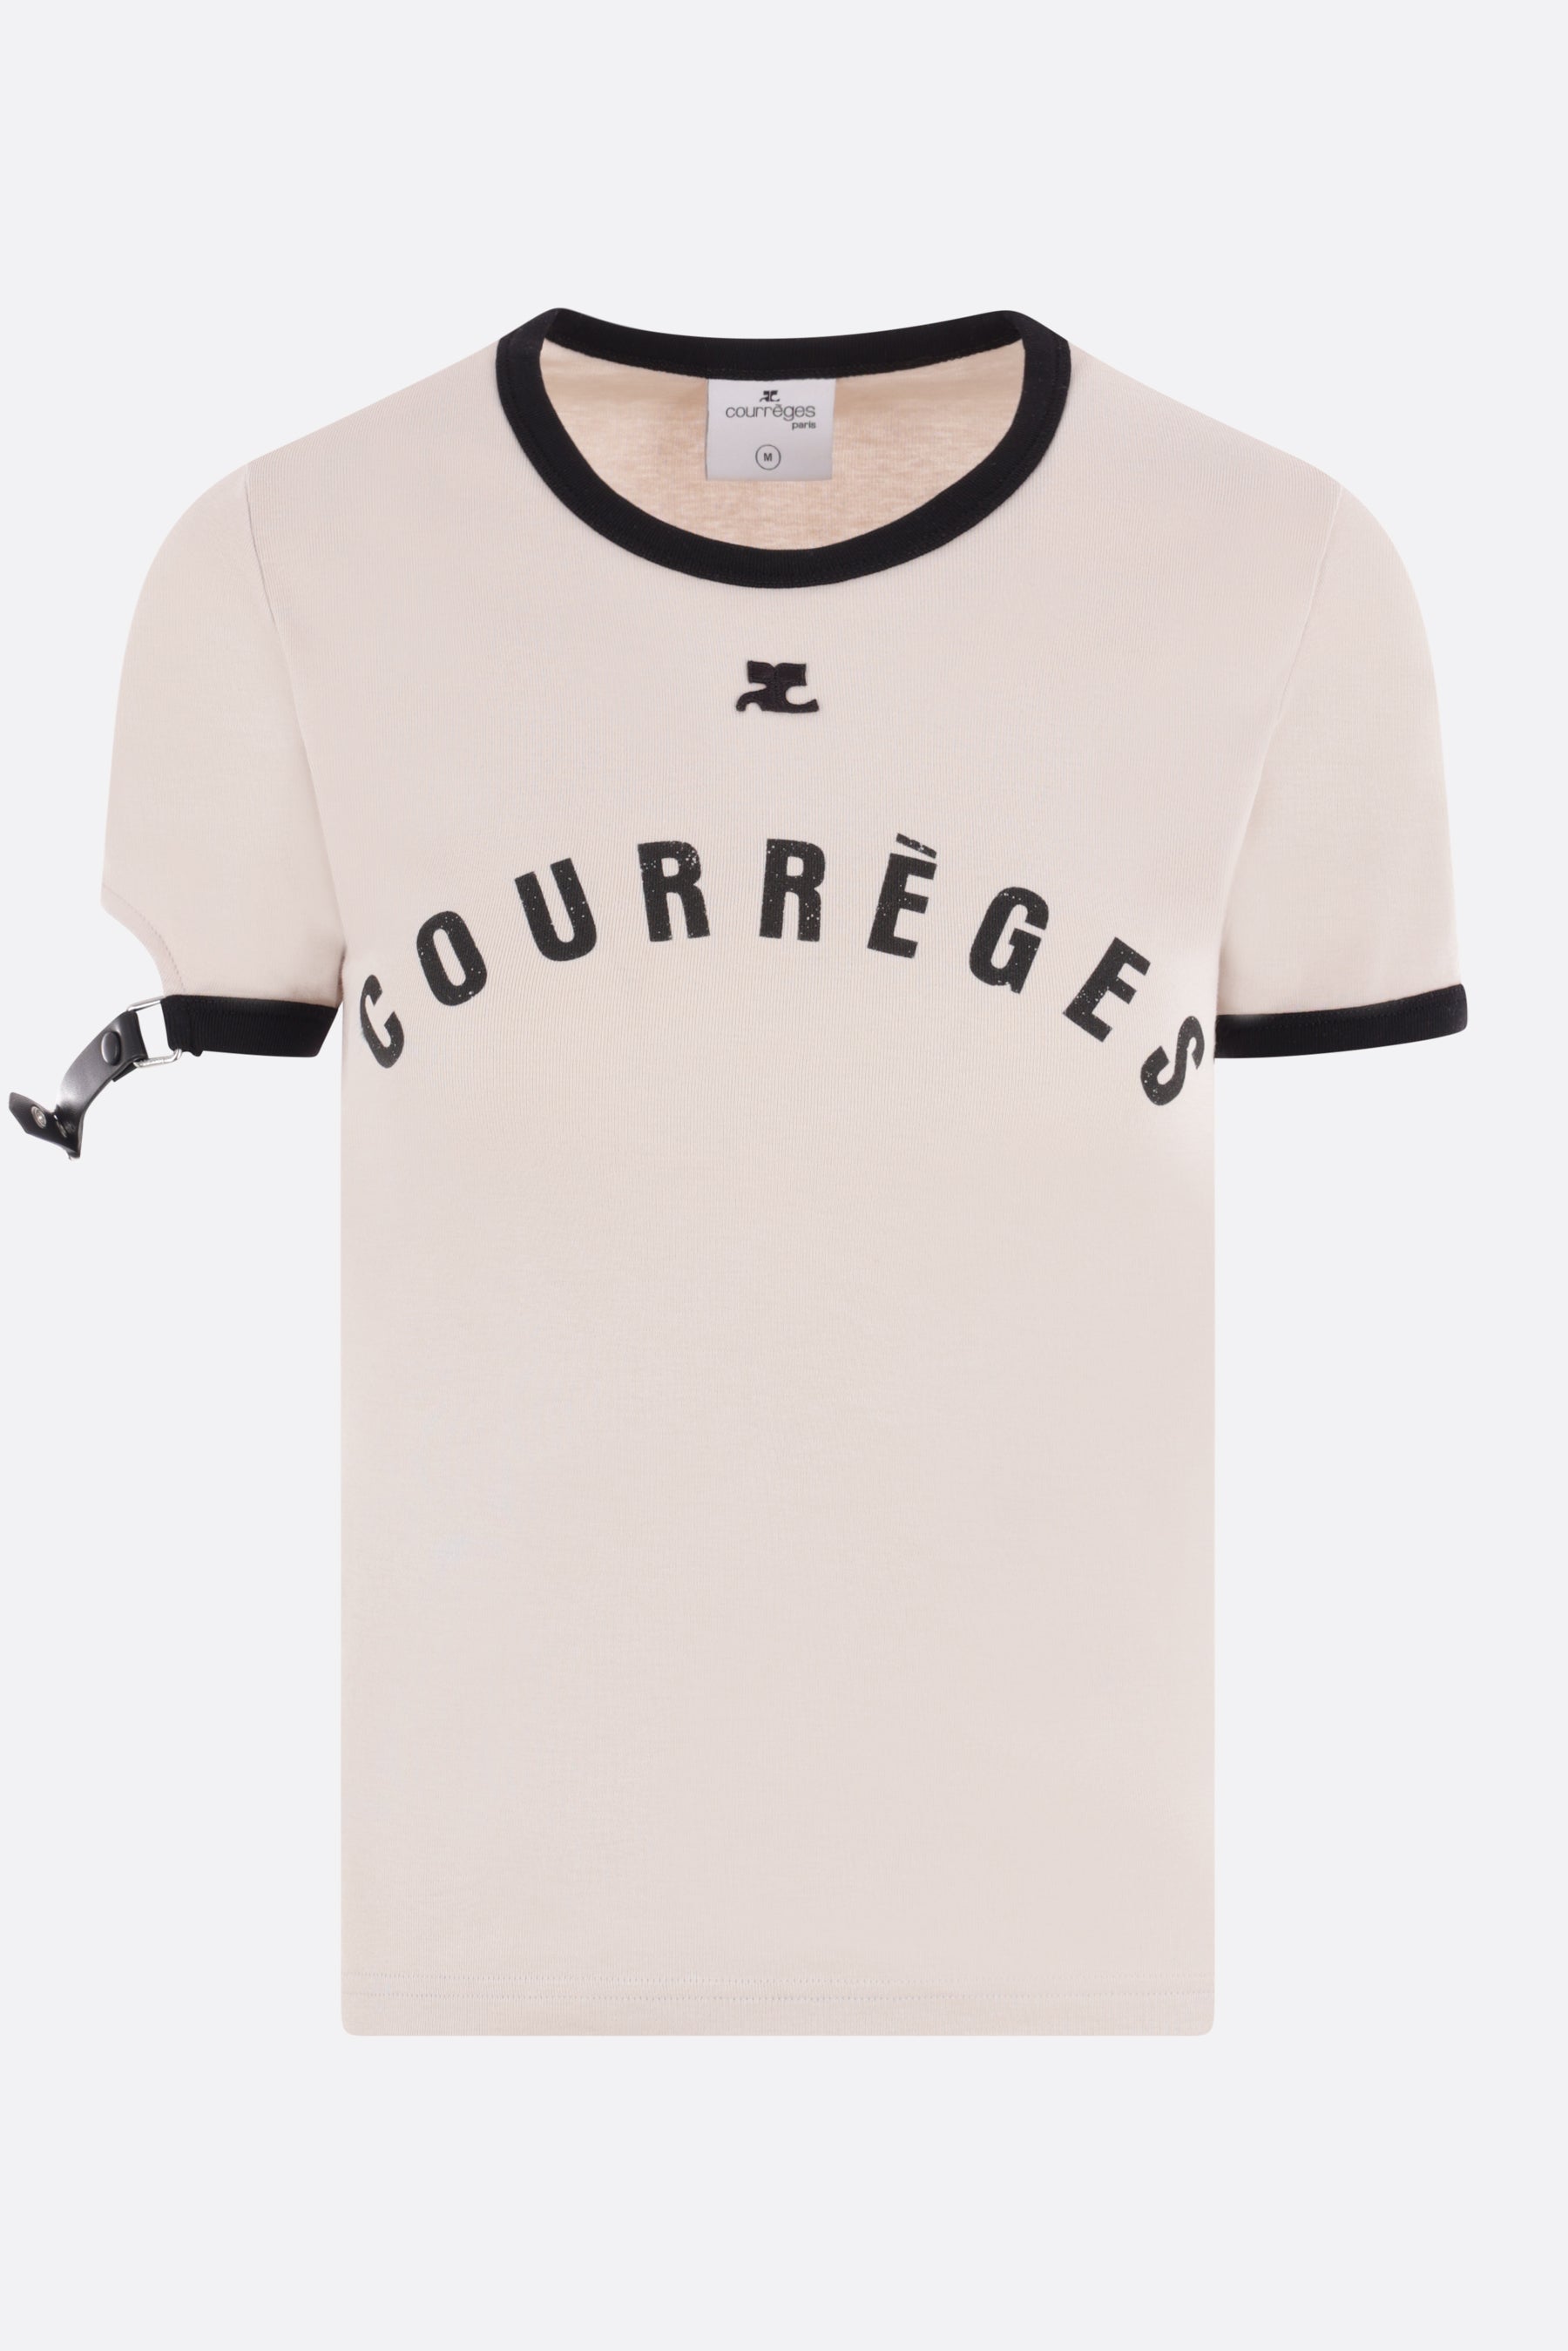 logo printed / embroidered jersey t-shirt with buckle